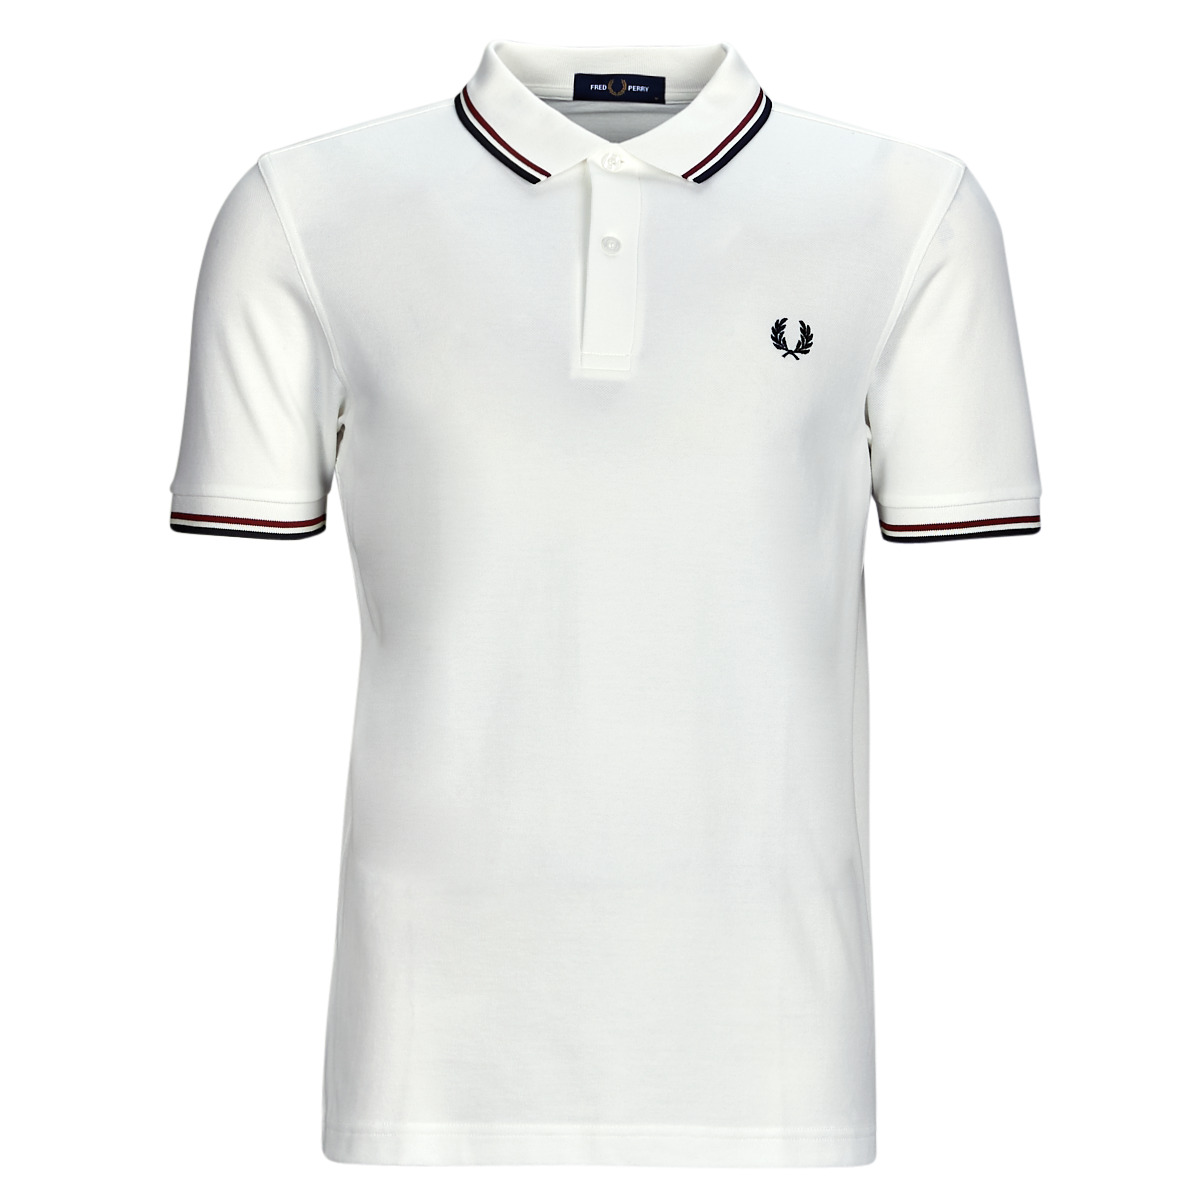 fred perry  twin tipped fred perry shirt  men's polo shirt in white